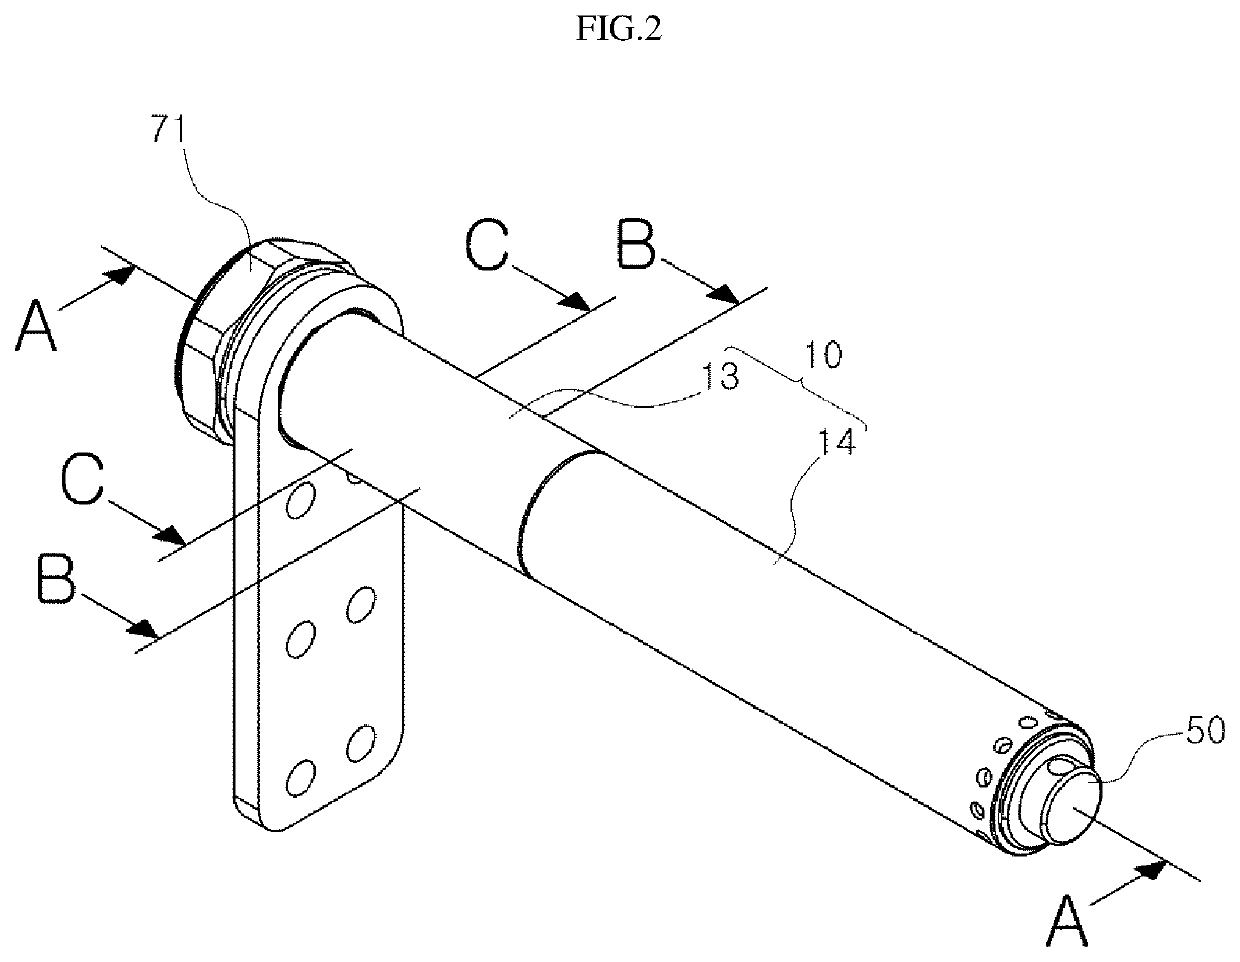 Hinge device for rotating door